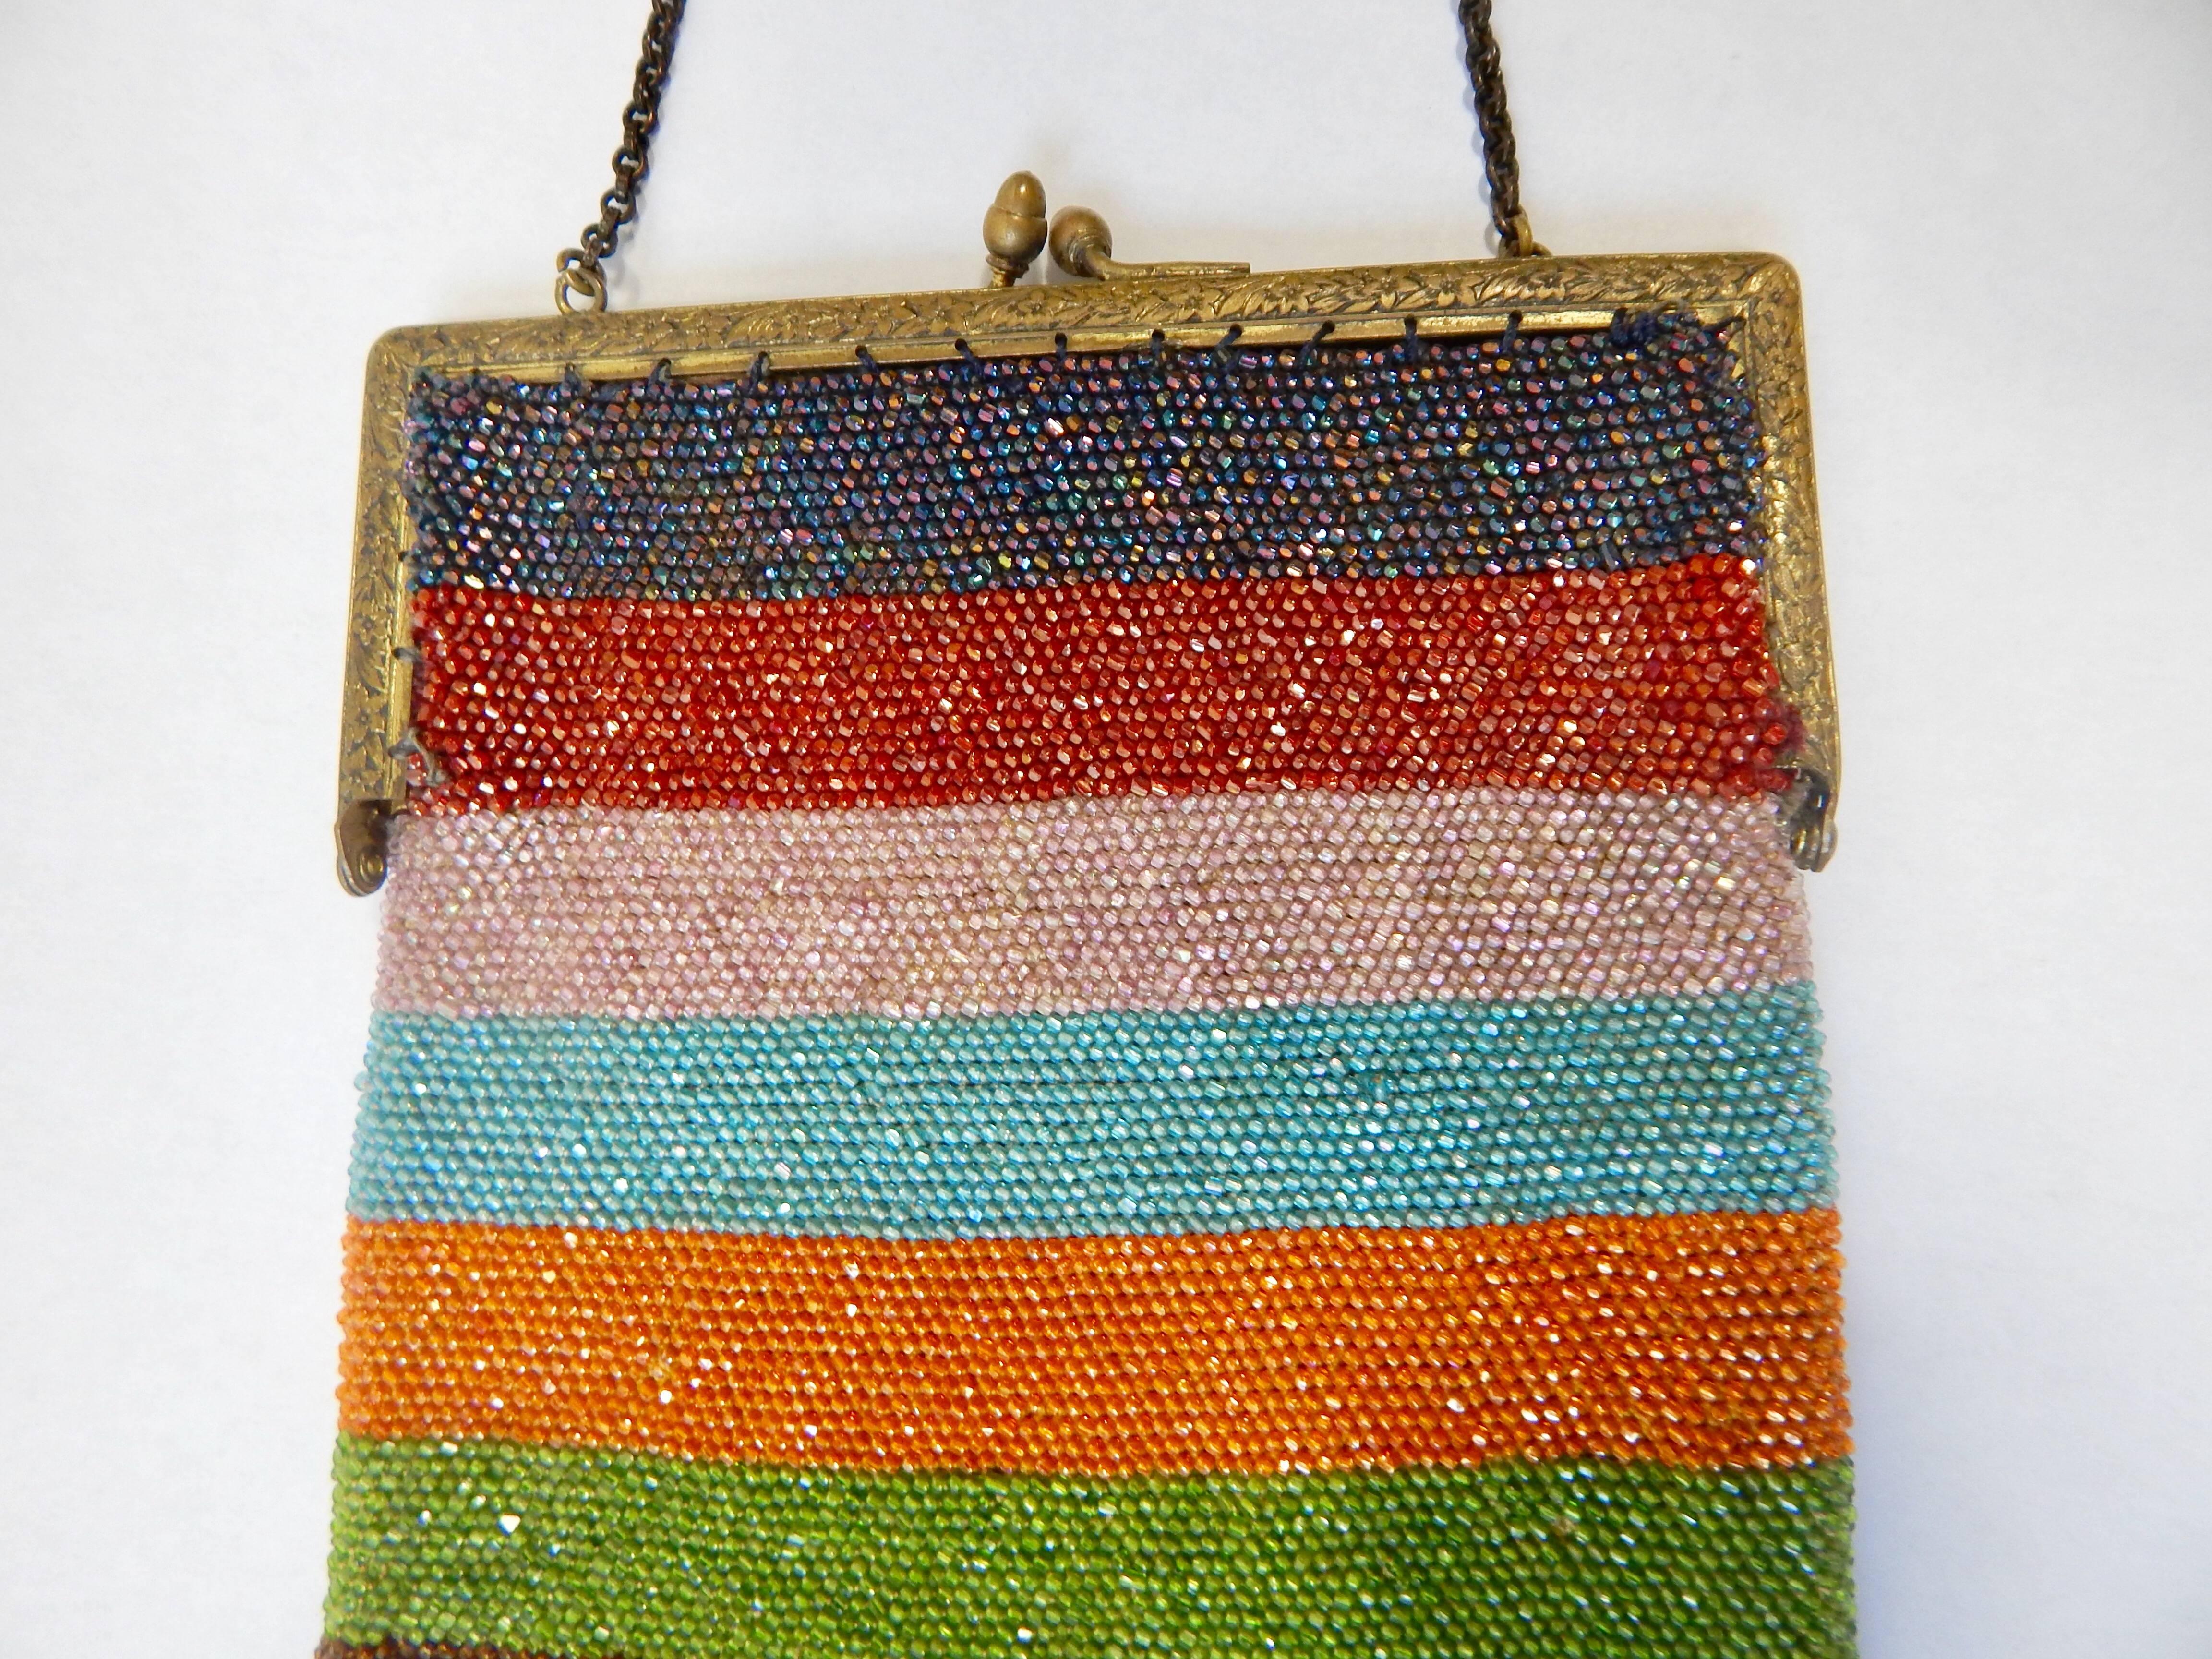 Unique multicolored brightly striped design with multicolored fringe. Entire purse is beaded with ornate antique gold hardware. Clasp closure and hand chain. 